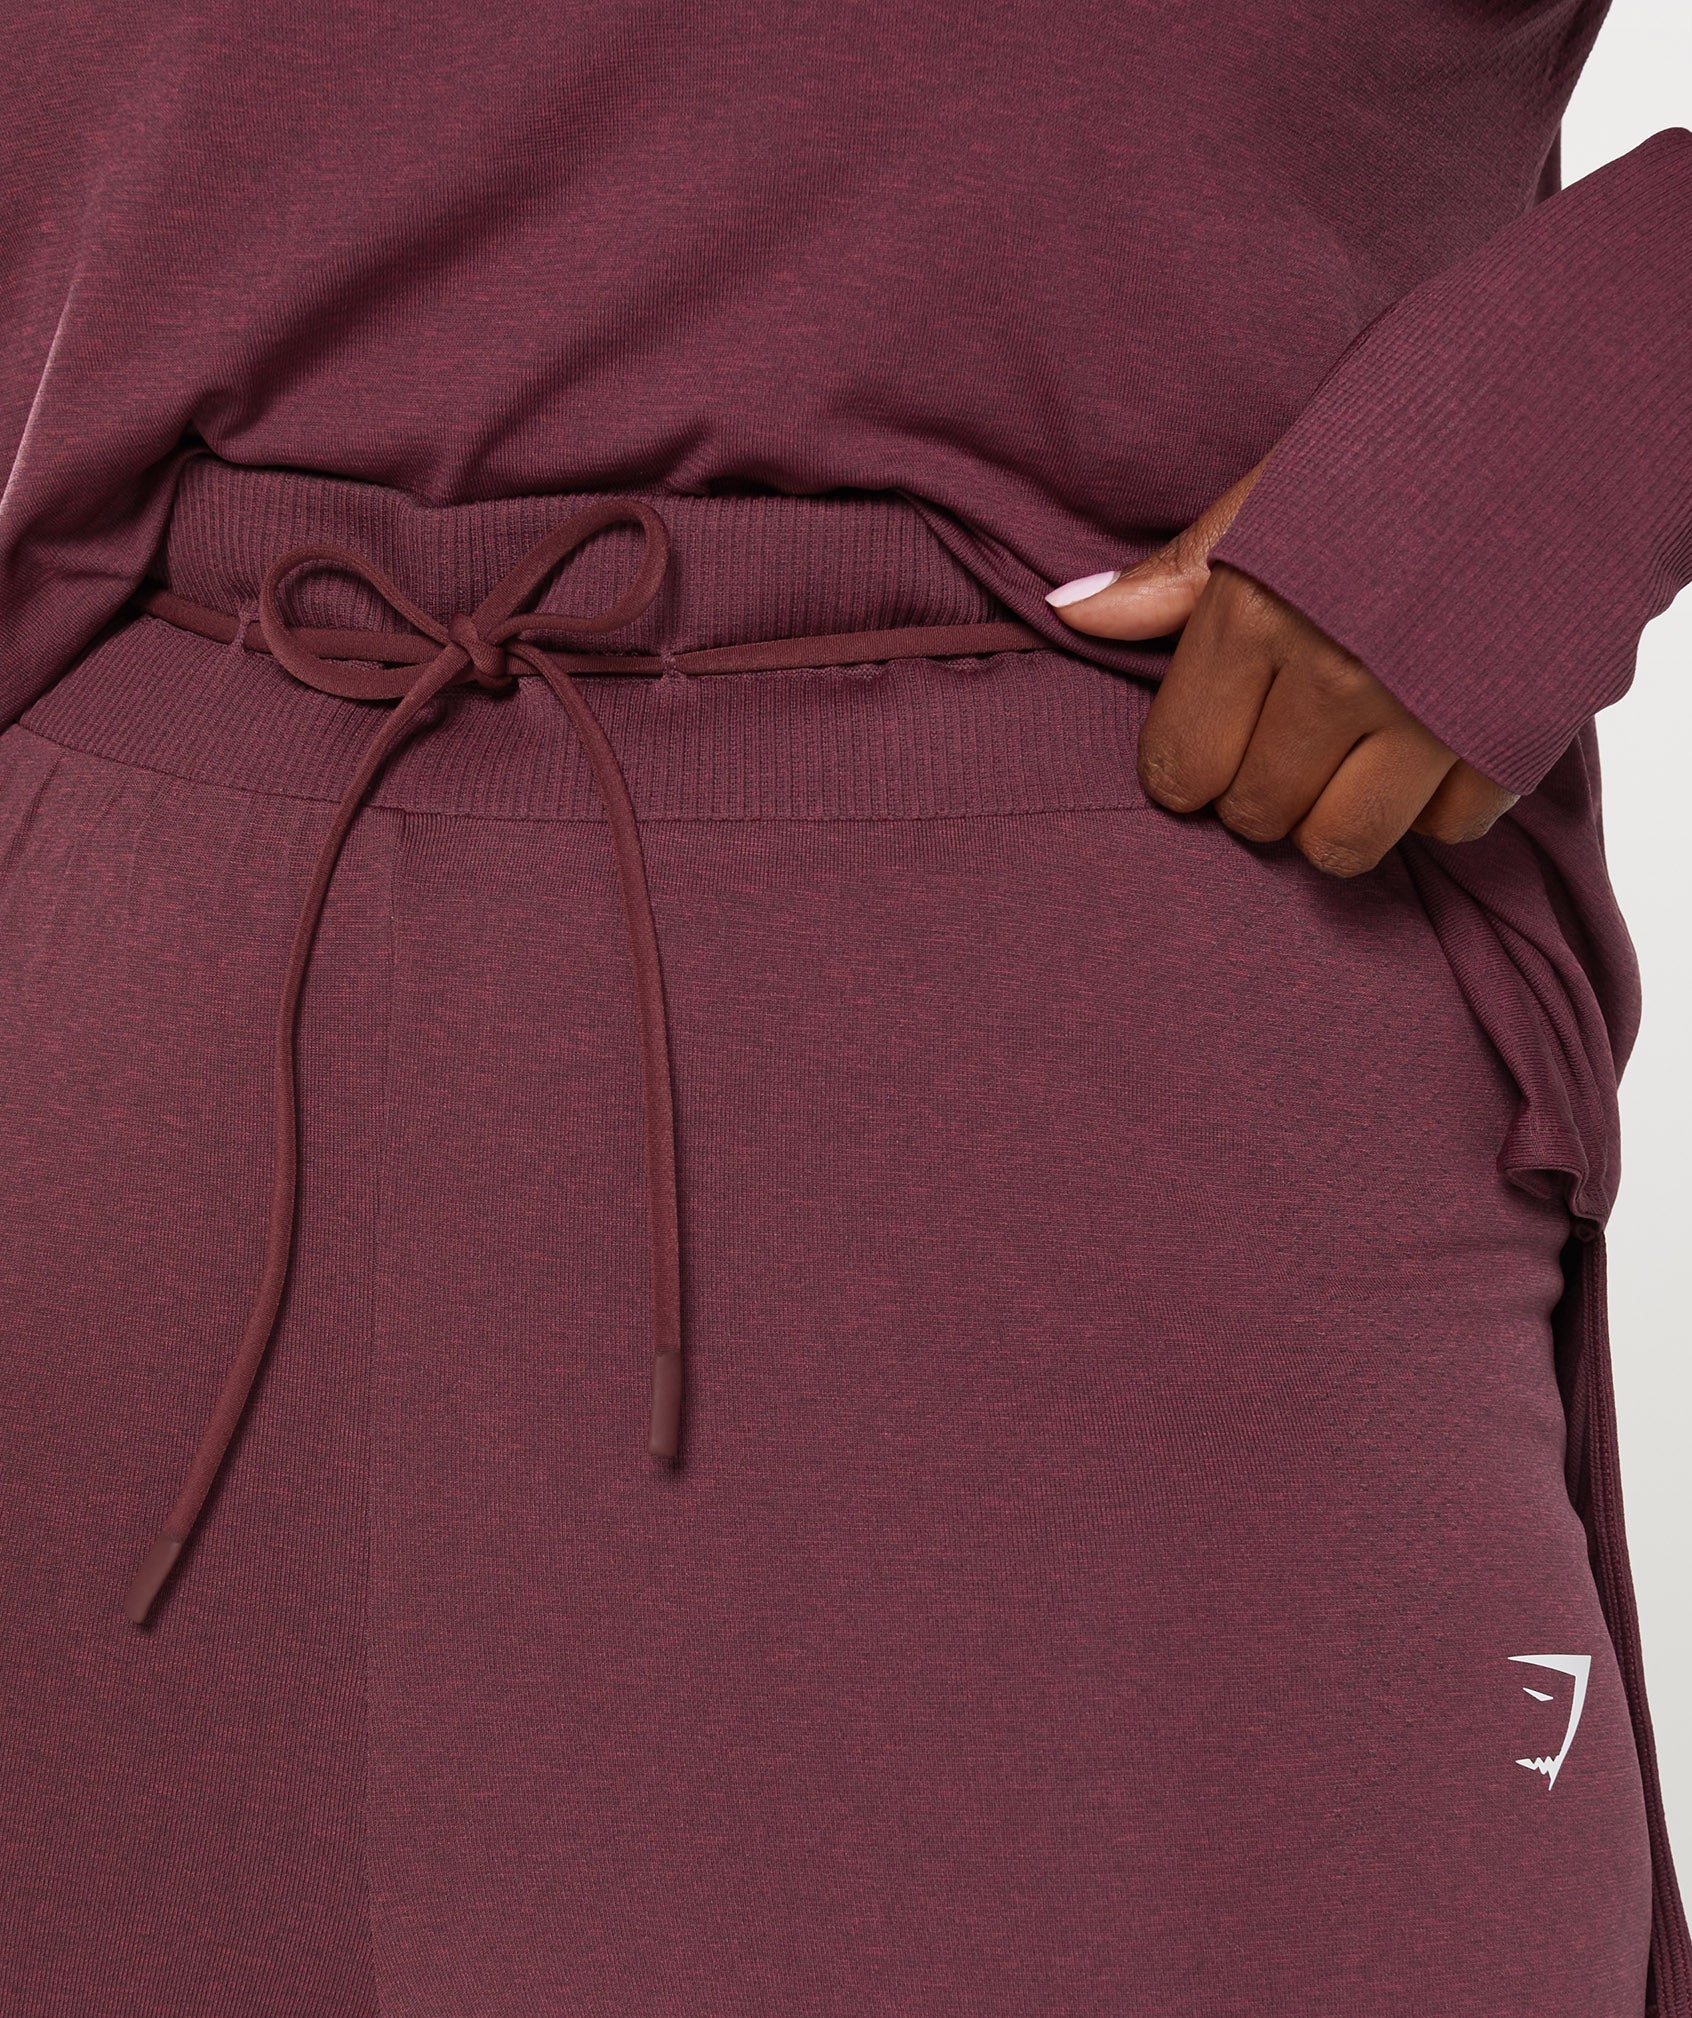 Vital Seamless 2.0 Joggers in Baked Maroon Marl - view 6